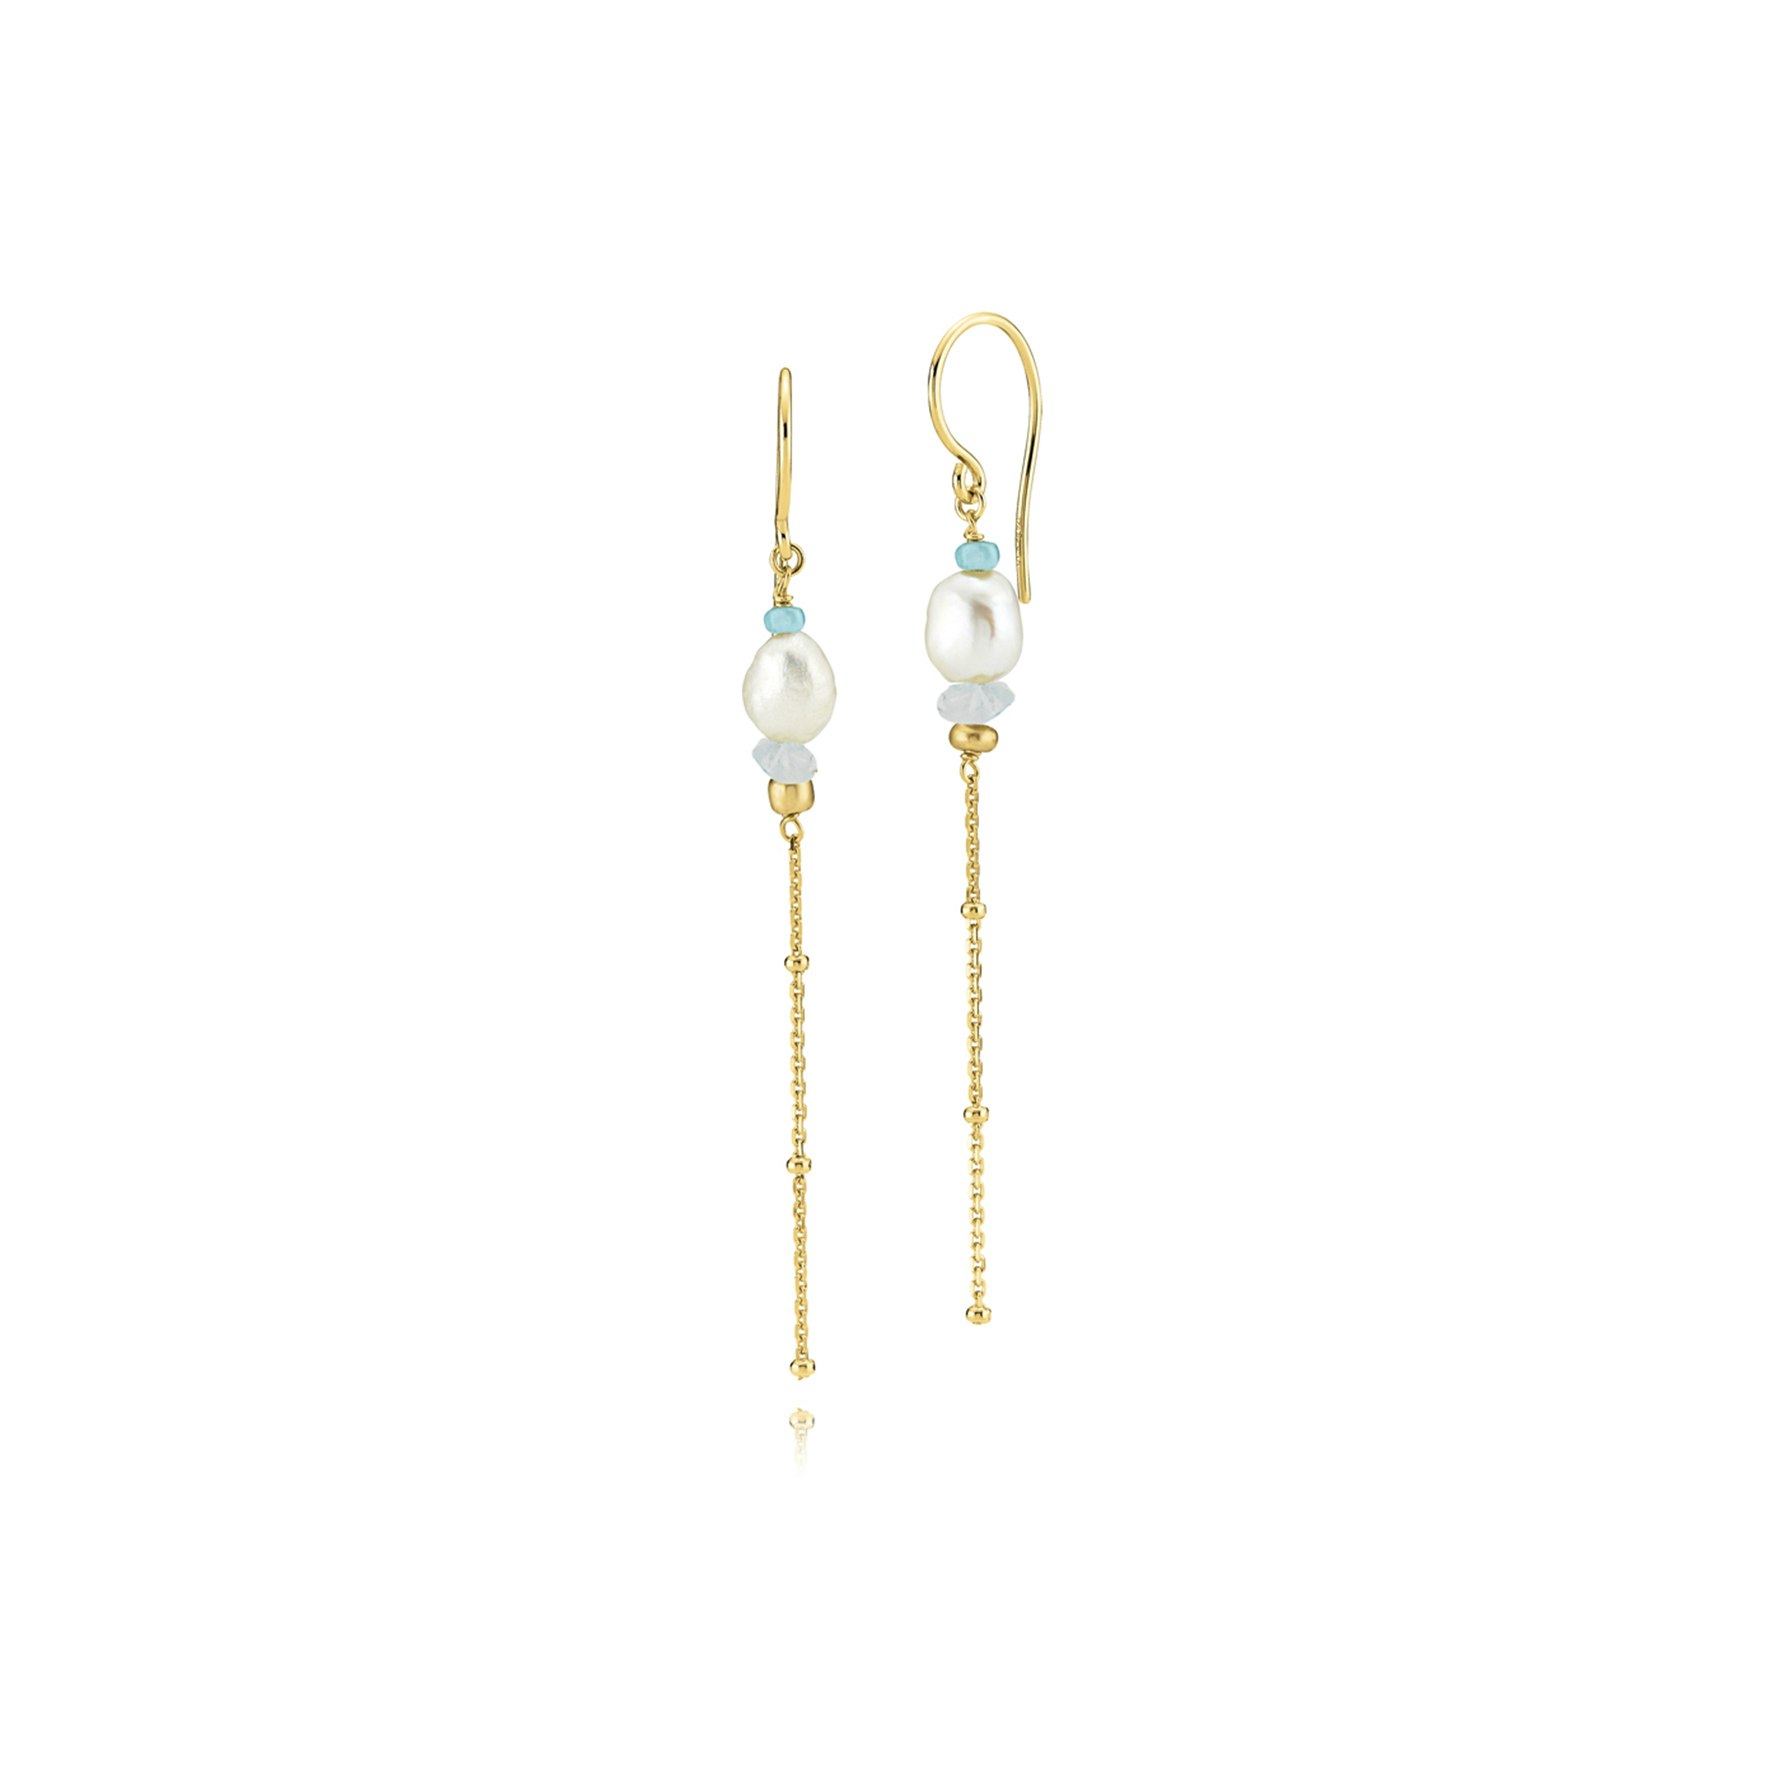 Beach Earrings Blue With Pearl from Sistie in Goldplated Silver Sterling 925